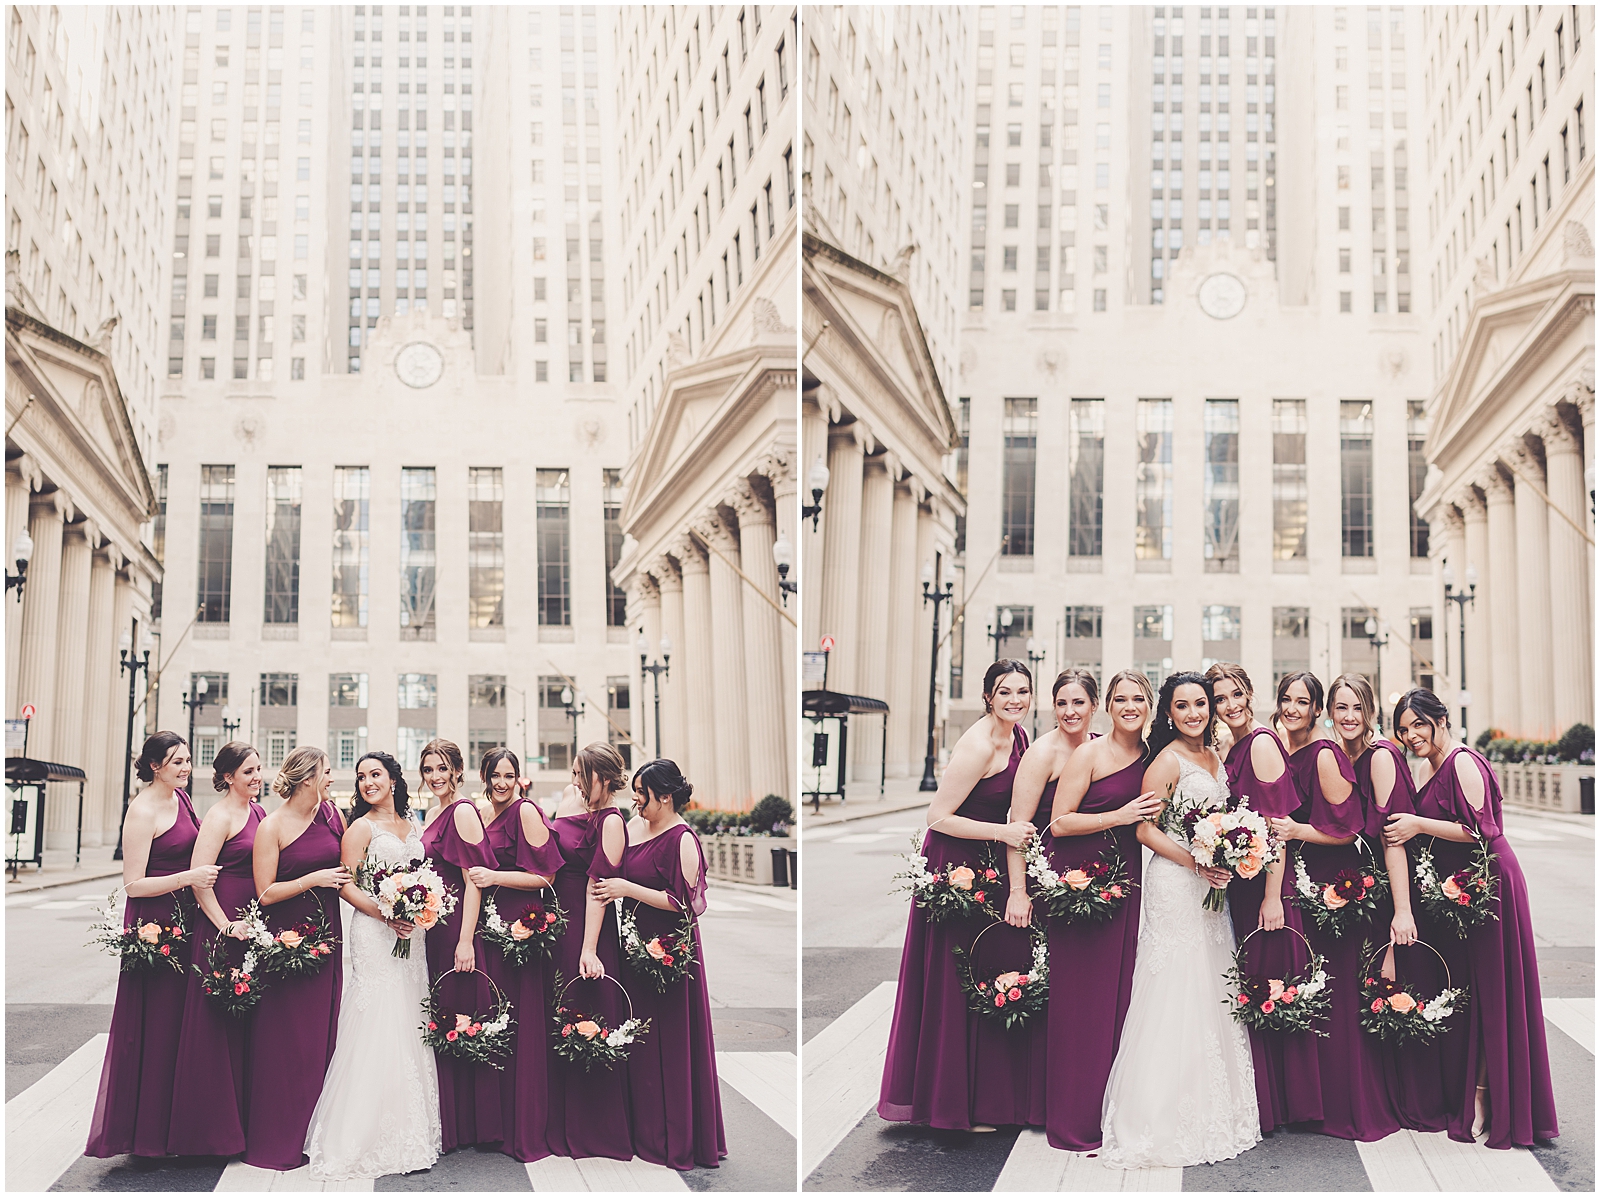 Julie and Paul's romantic Kimpton Gray wedding day in Chicago, Illinois with Chicagoland wedding photographer Kara Evans Photographer.